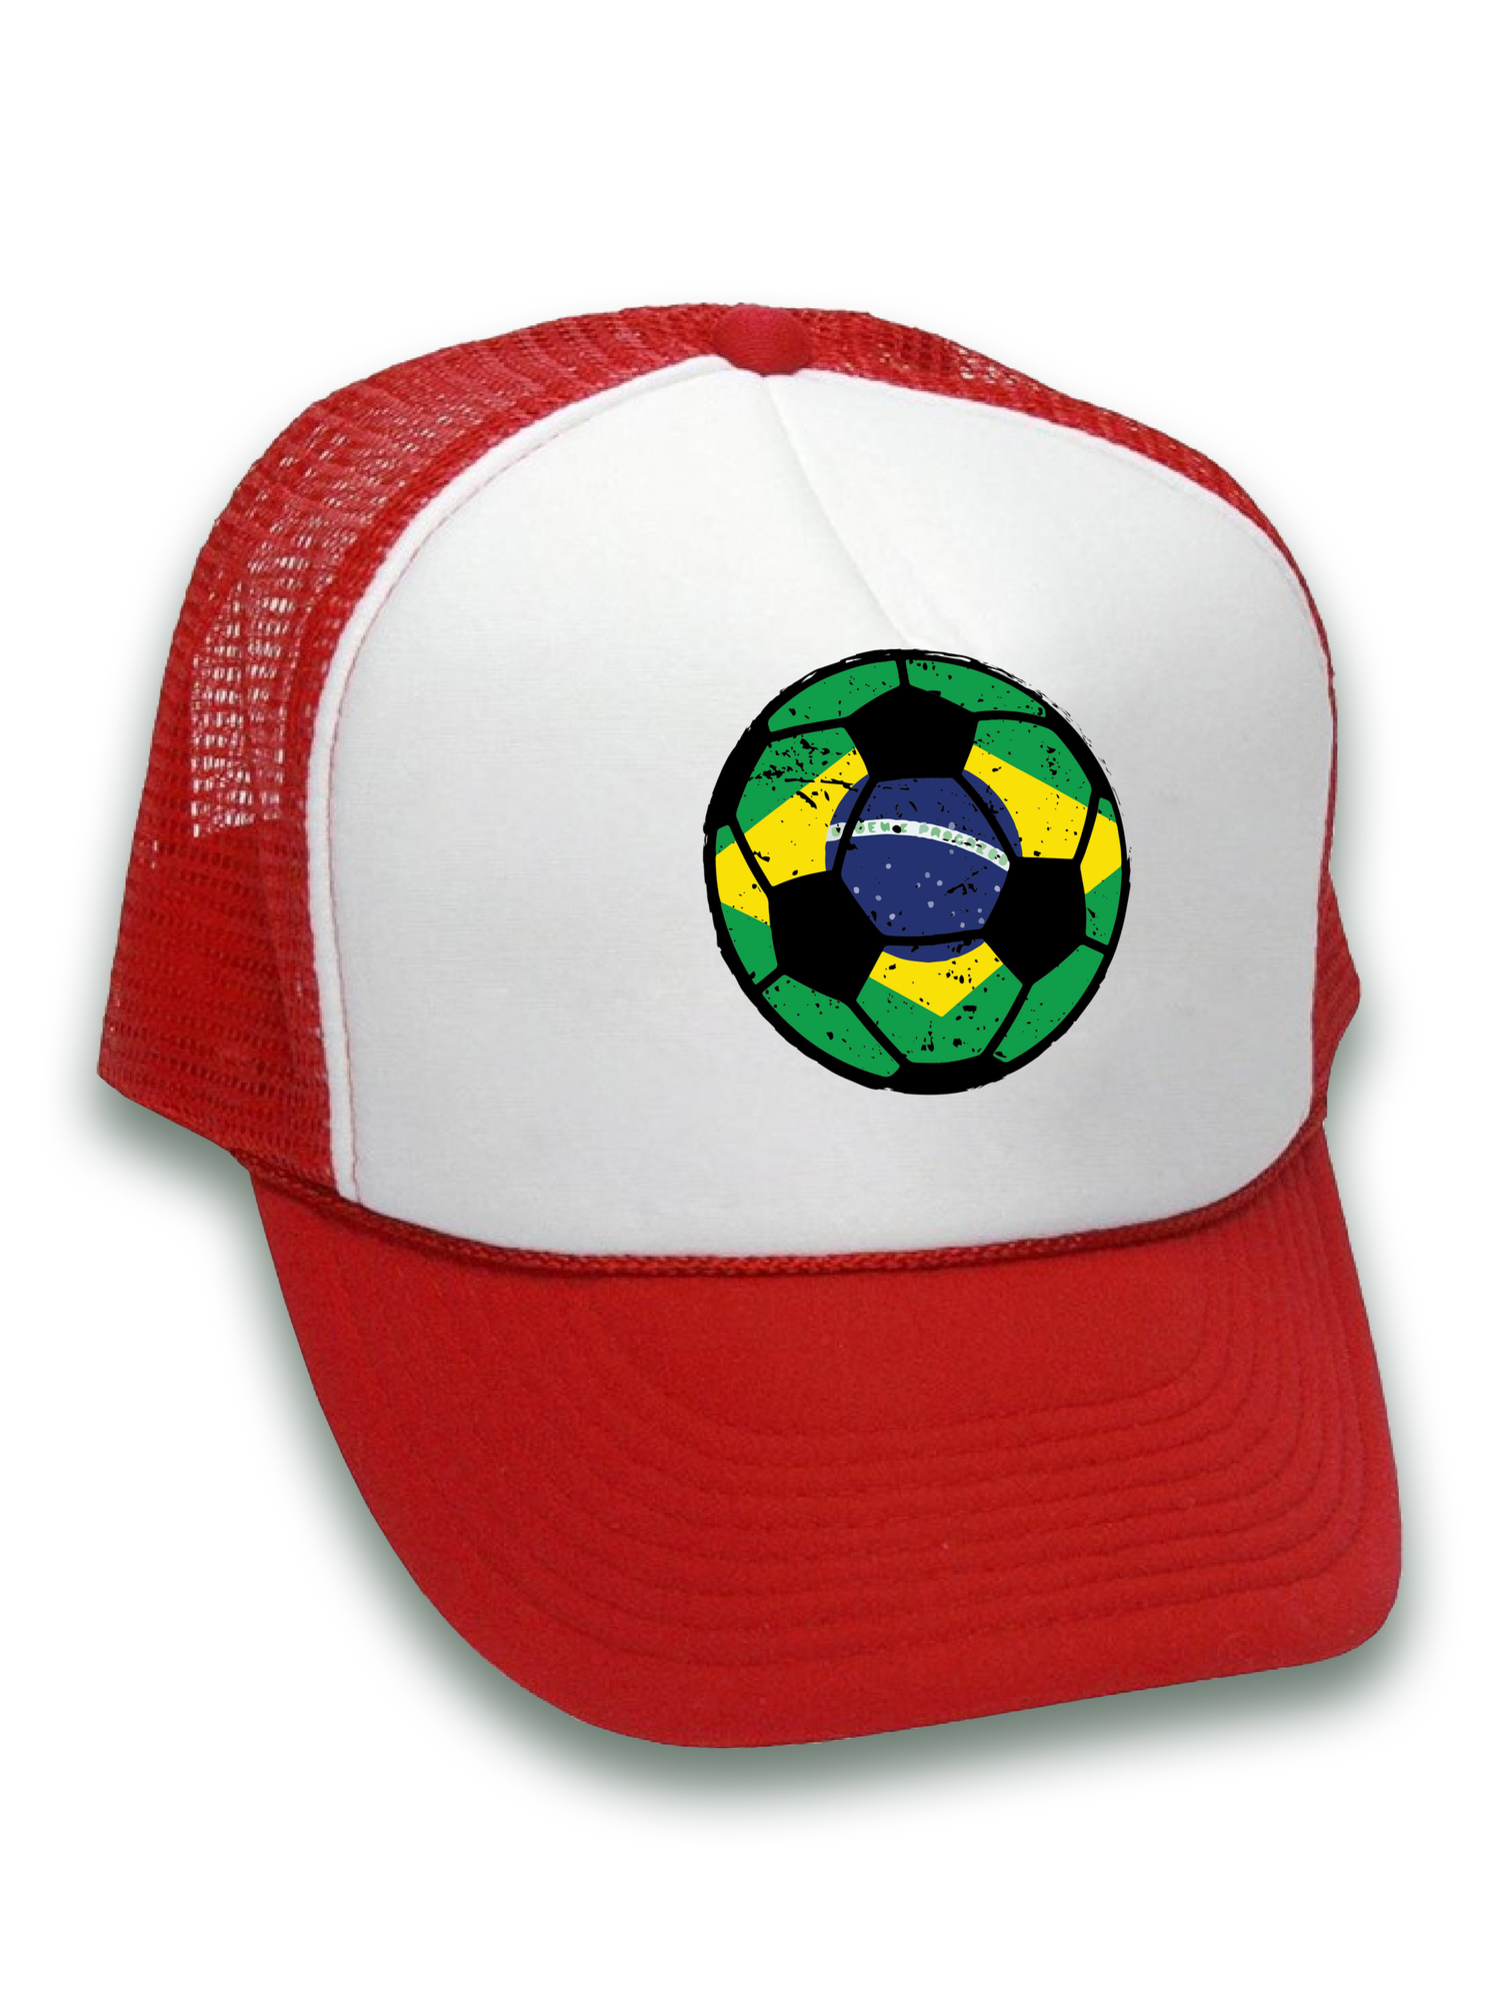 Awkward Styles Brazil Soccer Ball Hat Brazilian Soccer Trucker Hat Brazil 2018 Baseball Cap Brazil Trucker Hats for Men and Women Hat Gifts from Brazil Brazilian Baseball Hats Brazilian Flag Hat - image 2 of 6